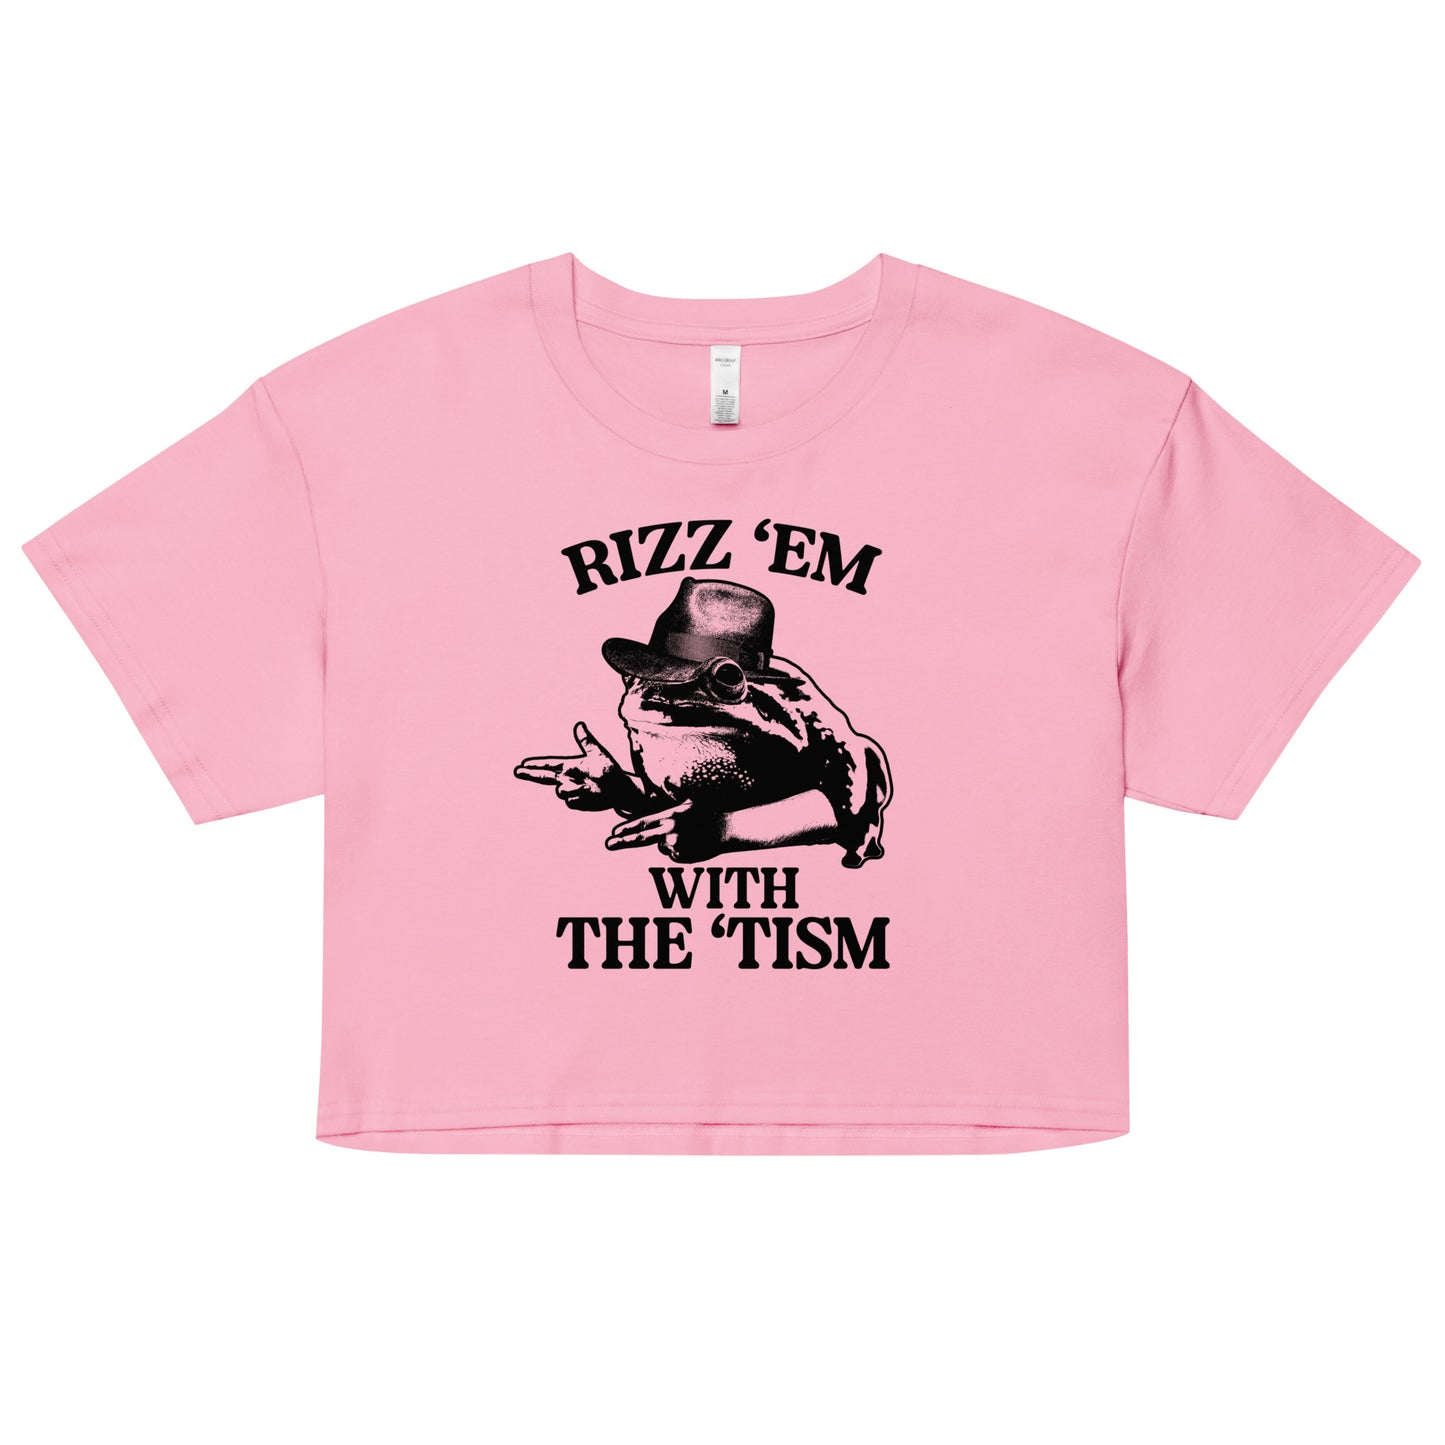 Rizz 'Em With the 'Tism (Frog) crop top